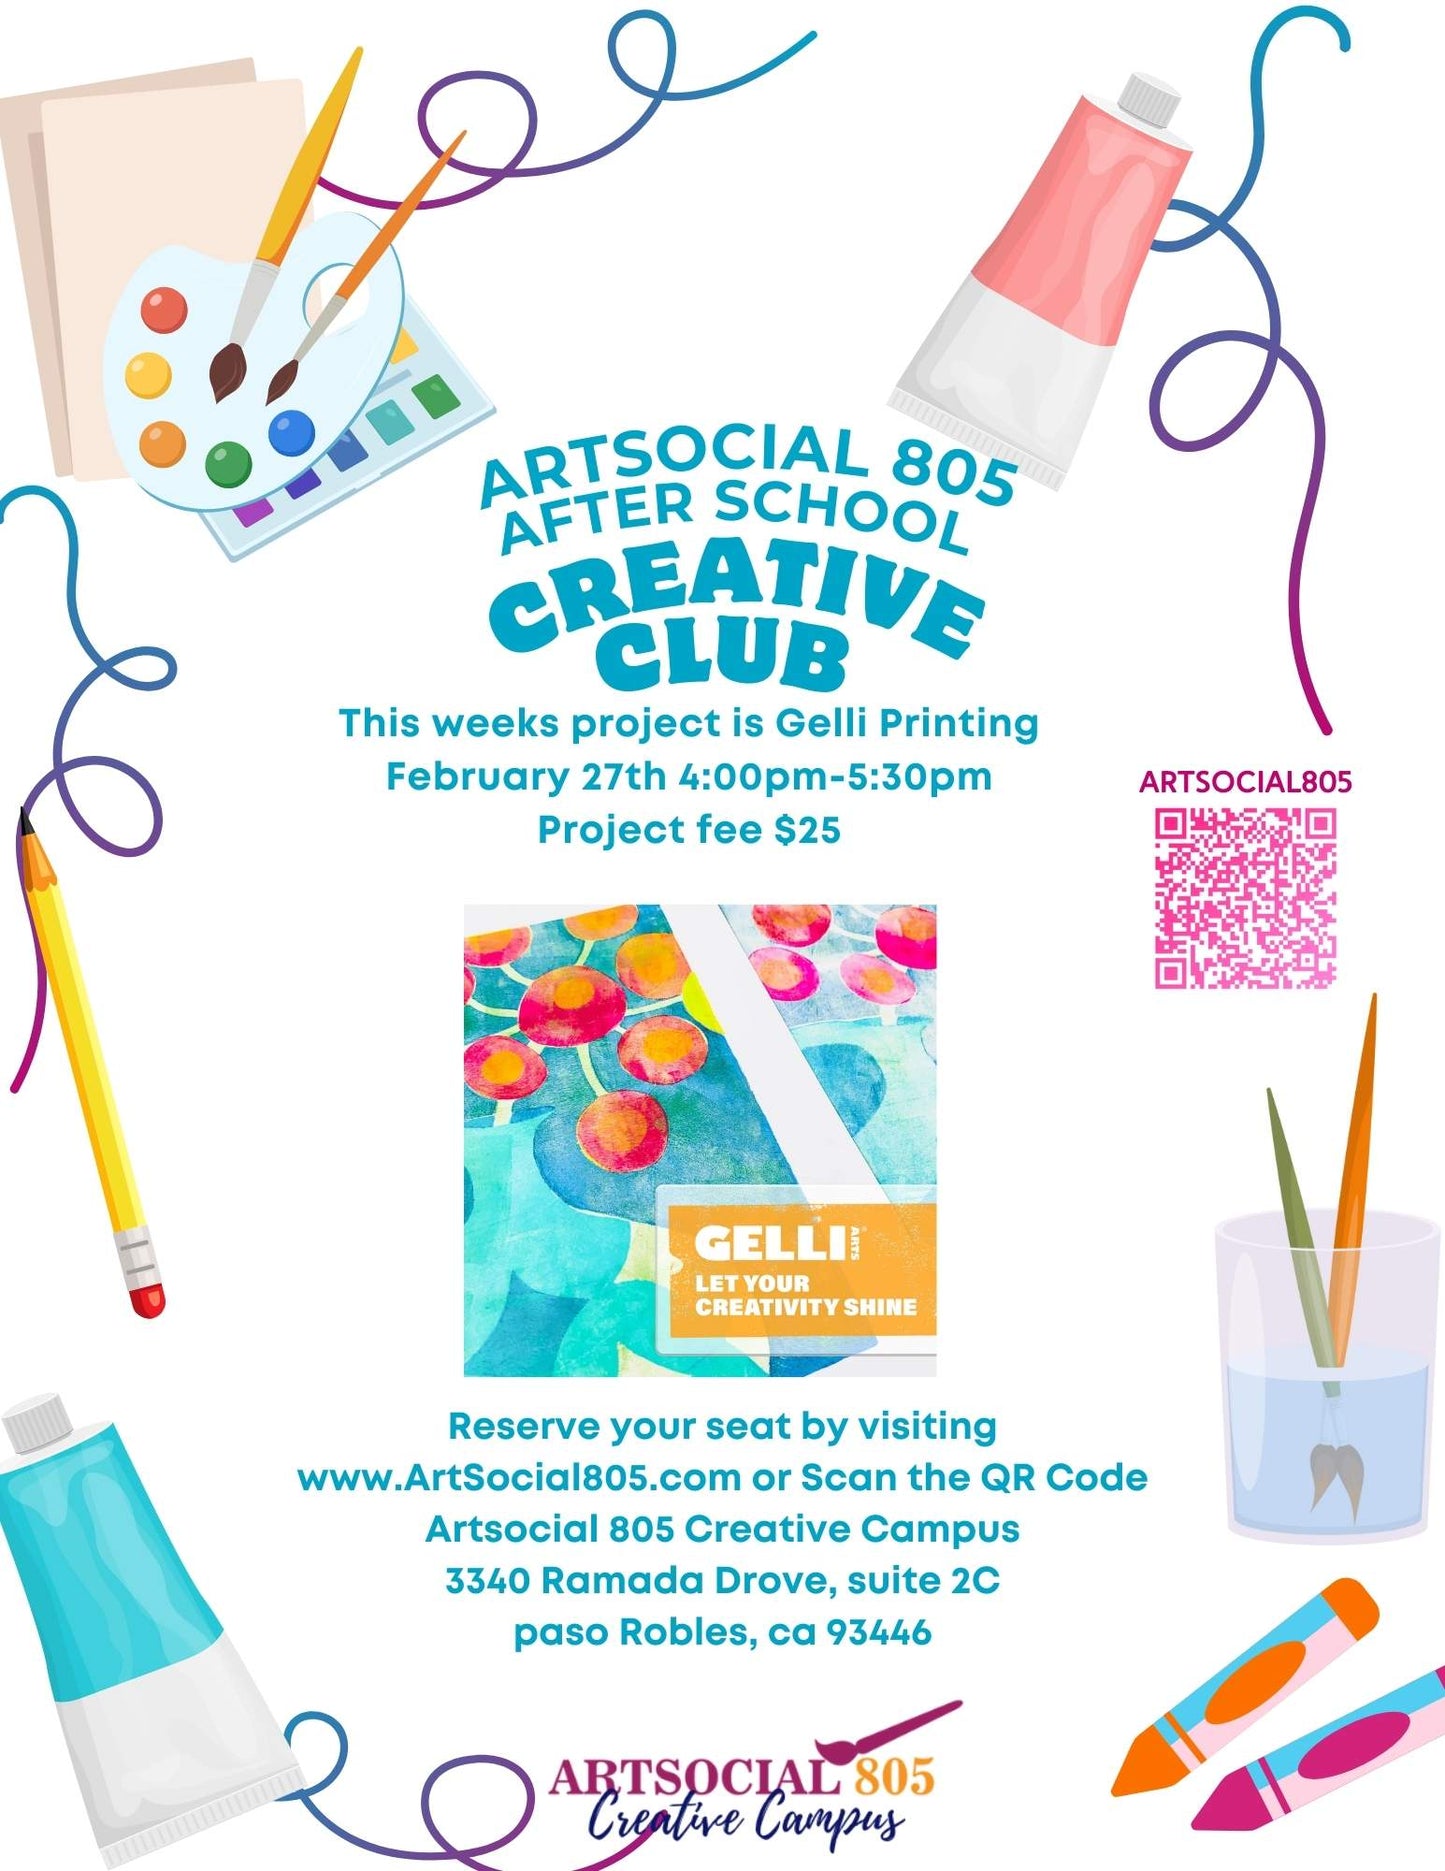 Gelli Printing at the Artsocial 805 After School Creative Club